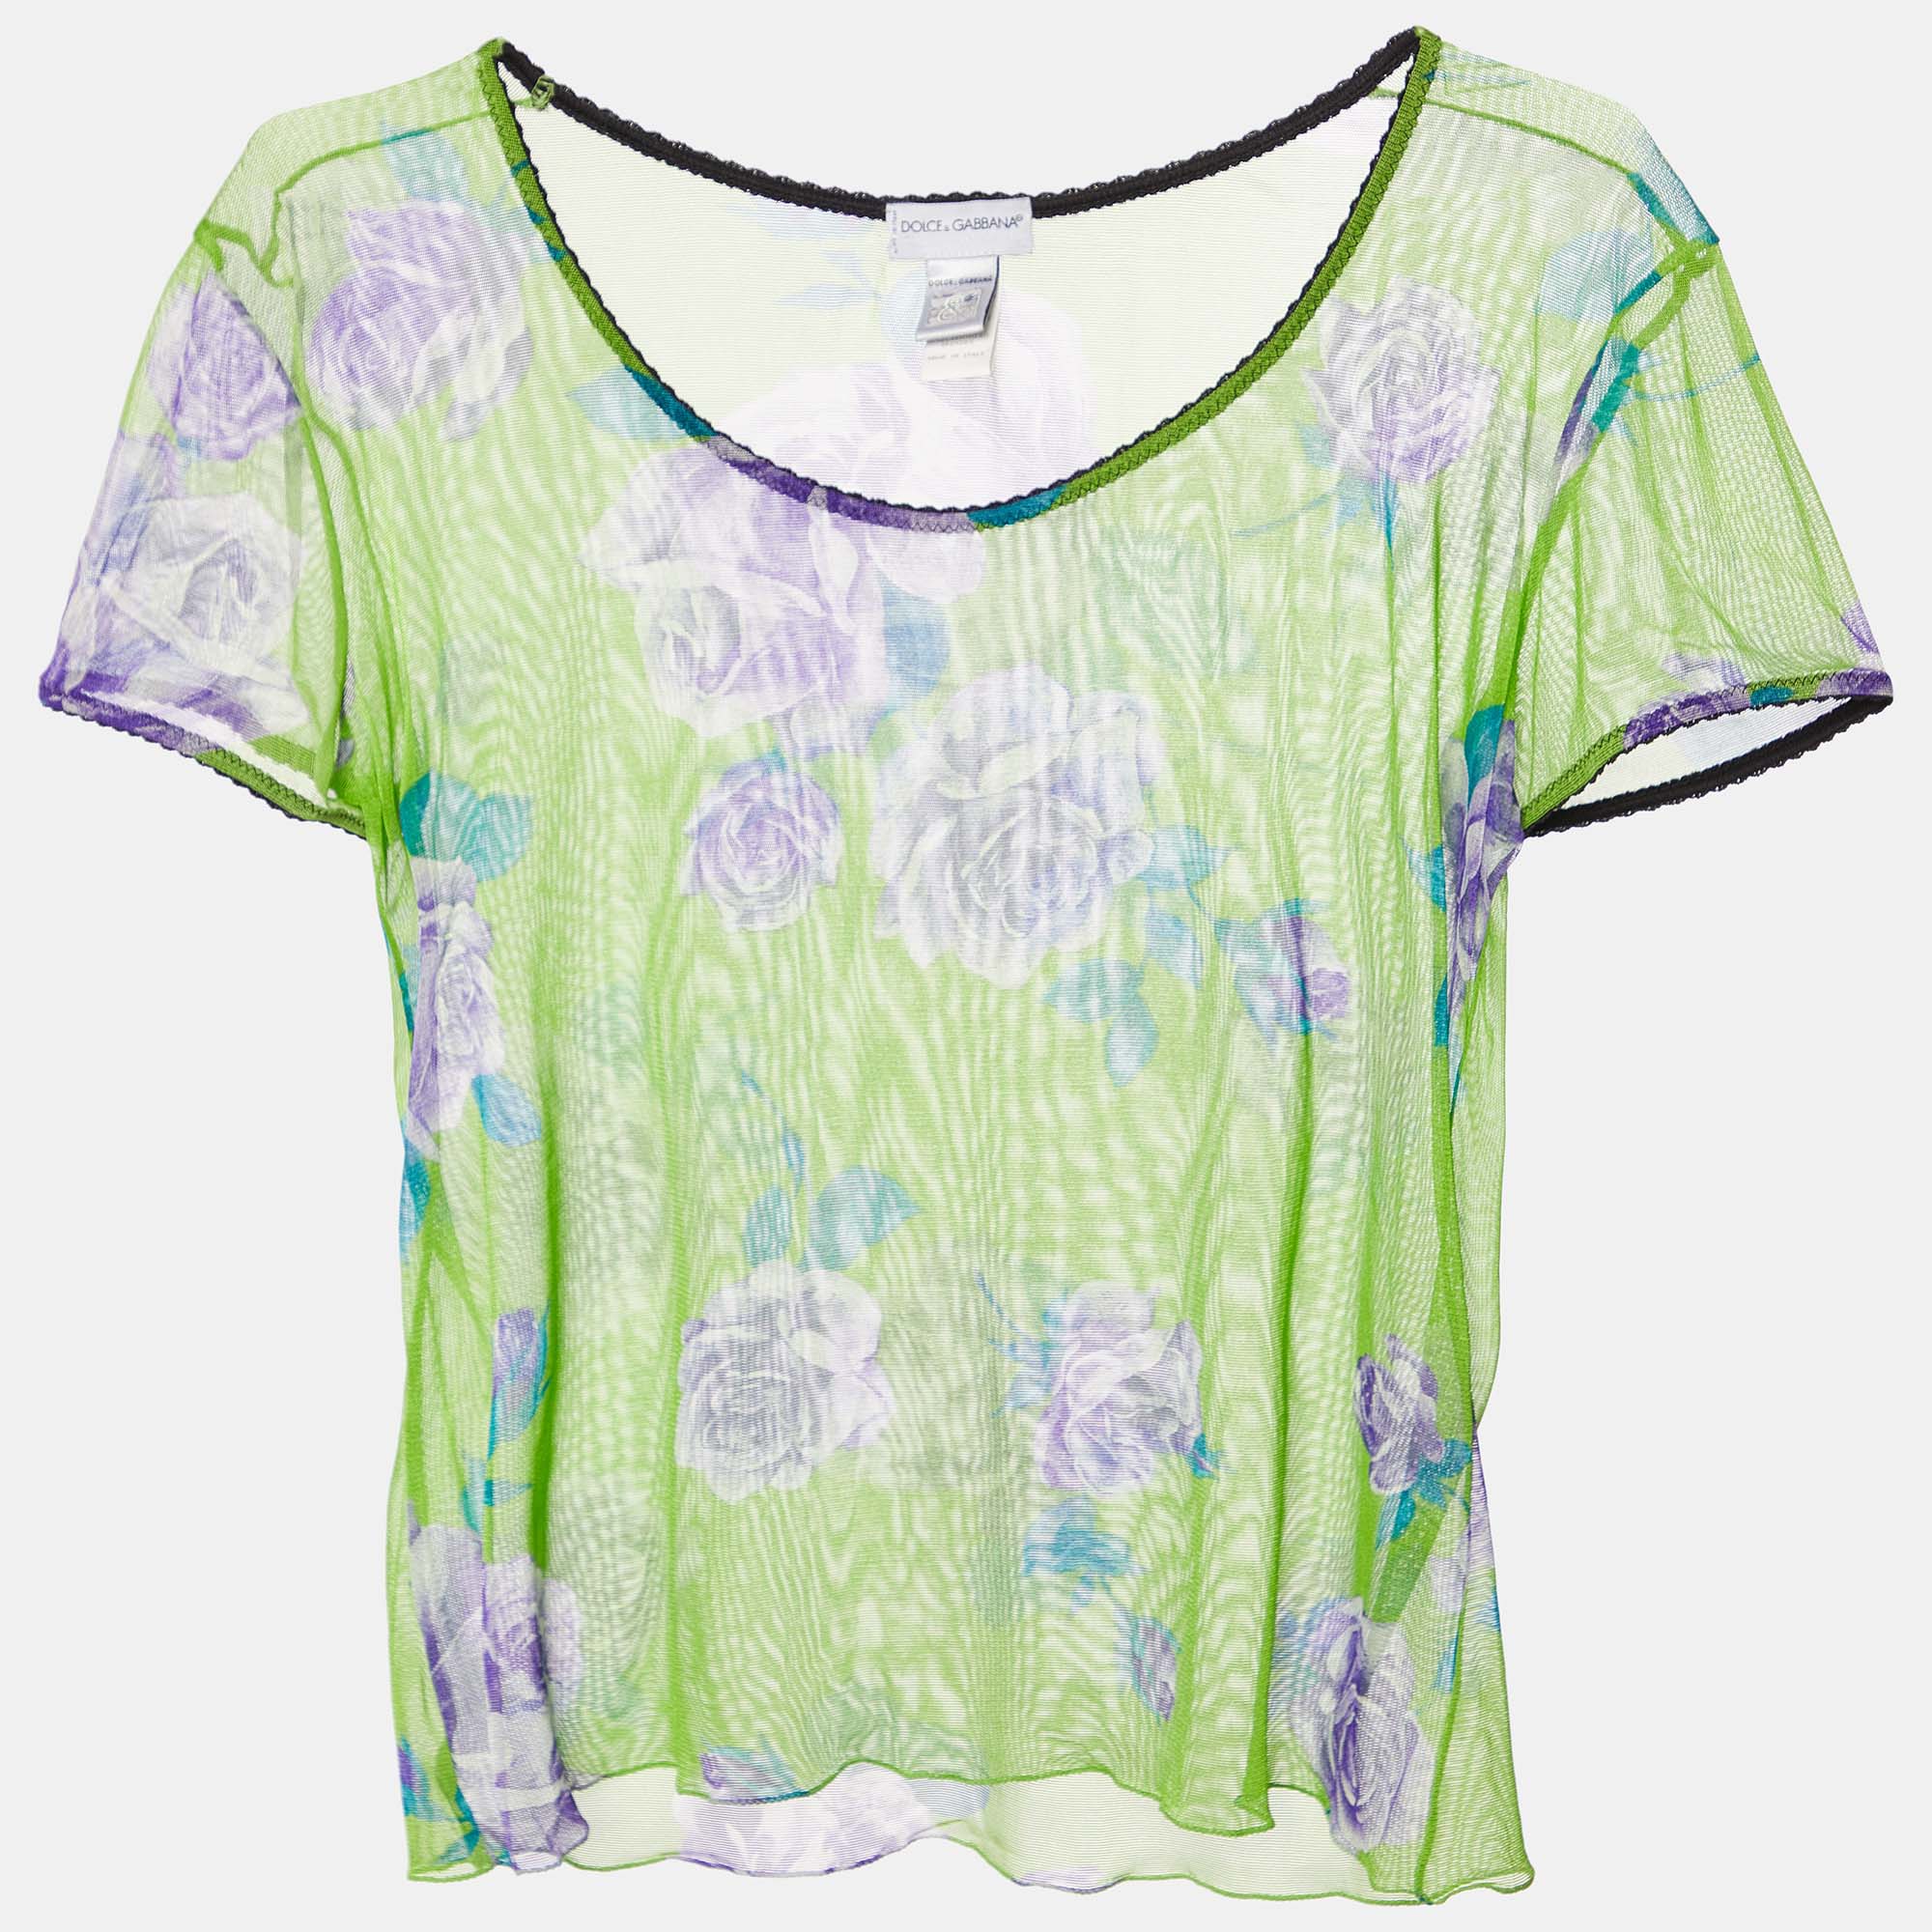 Dolce & gabbana intimo green floral print sheer top s